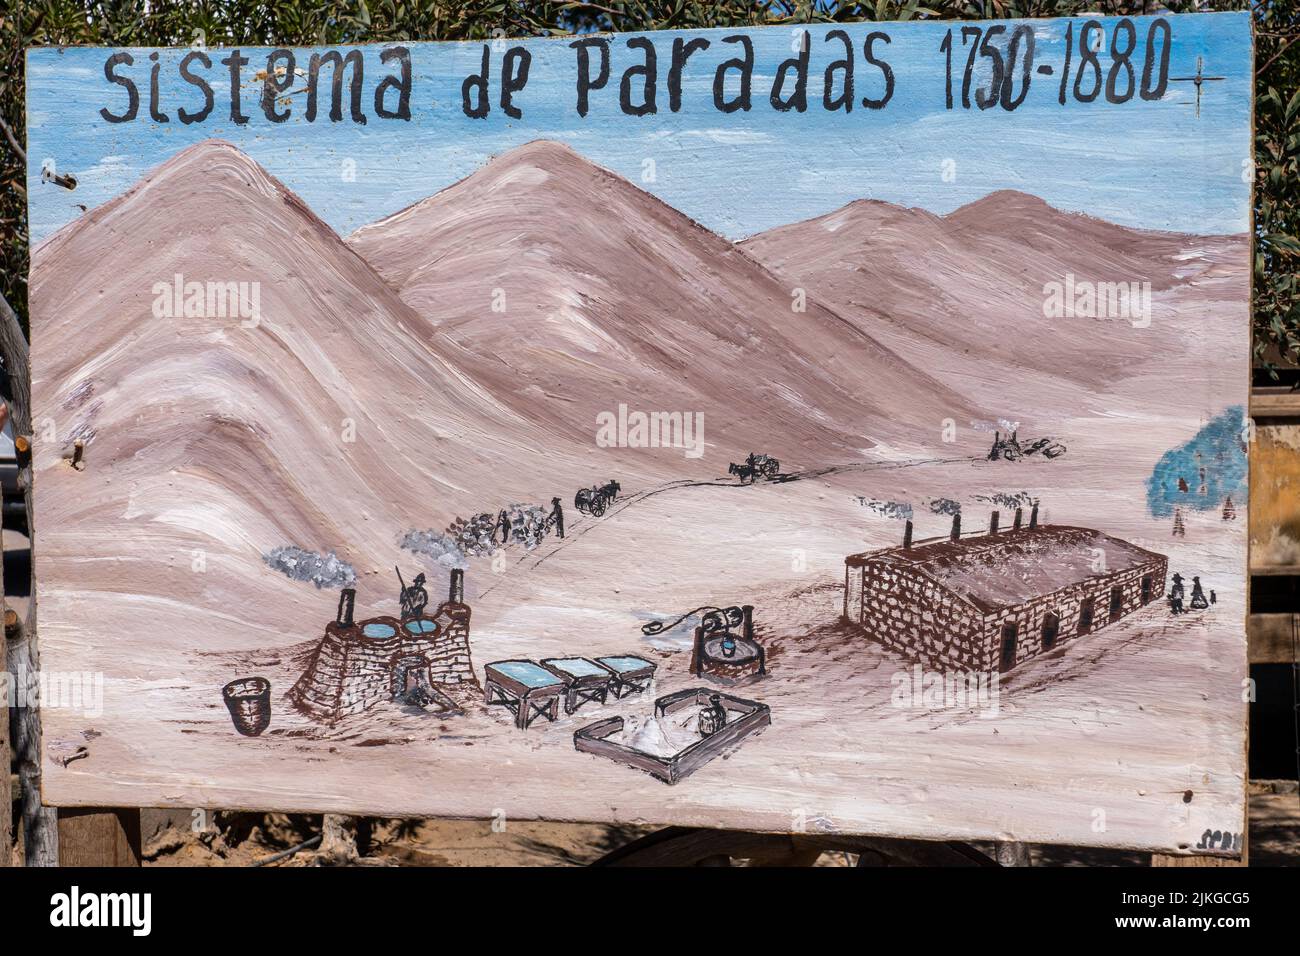 Museum display showing the early paradas system of processing saltpeter into usable nitrates.  Humberstone, Chile. Stock Photo